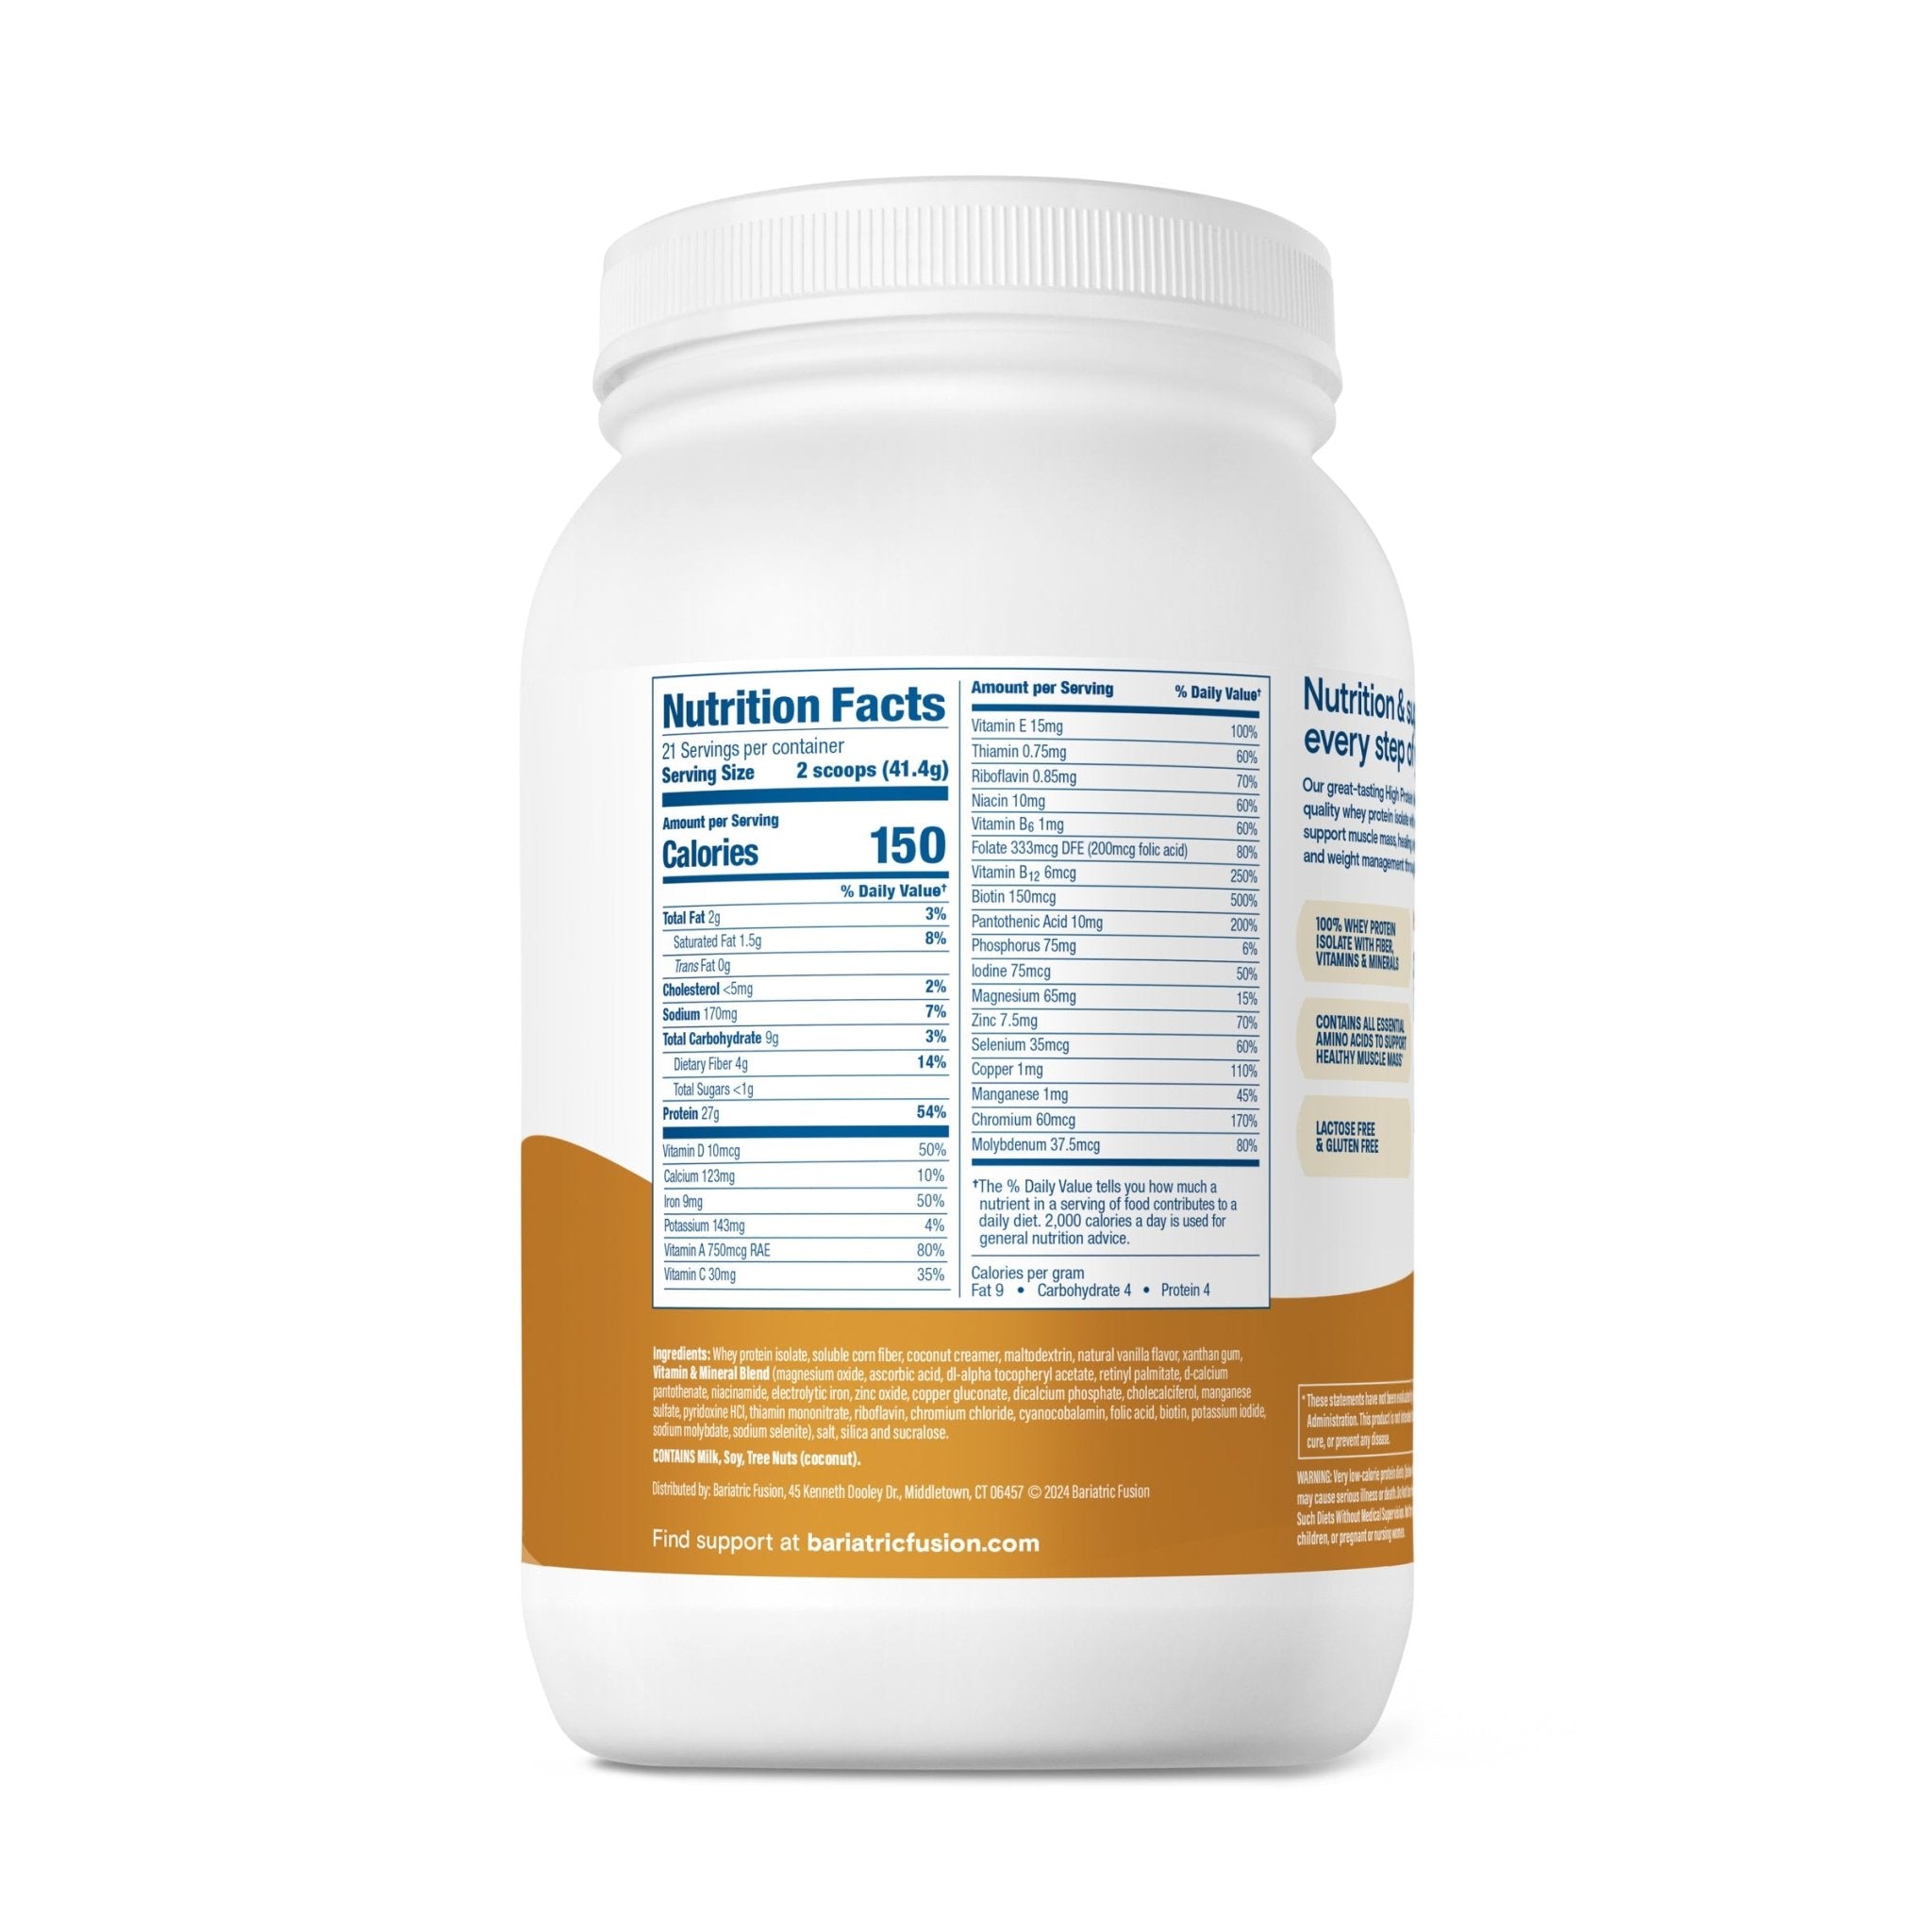 Vanilla High Protein Meal Replacement ingredients.